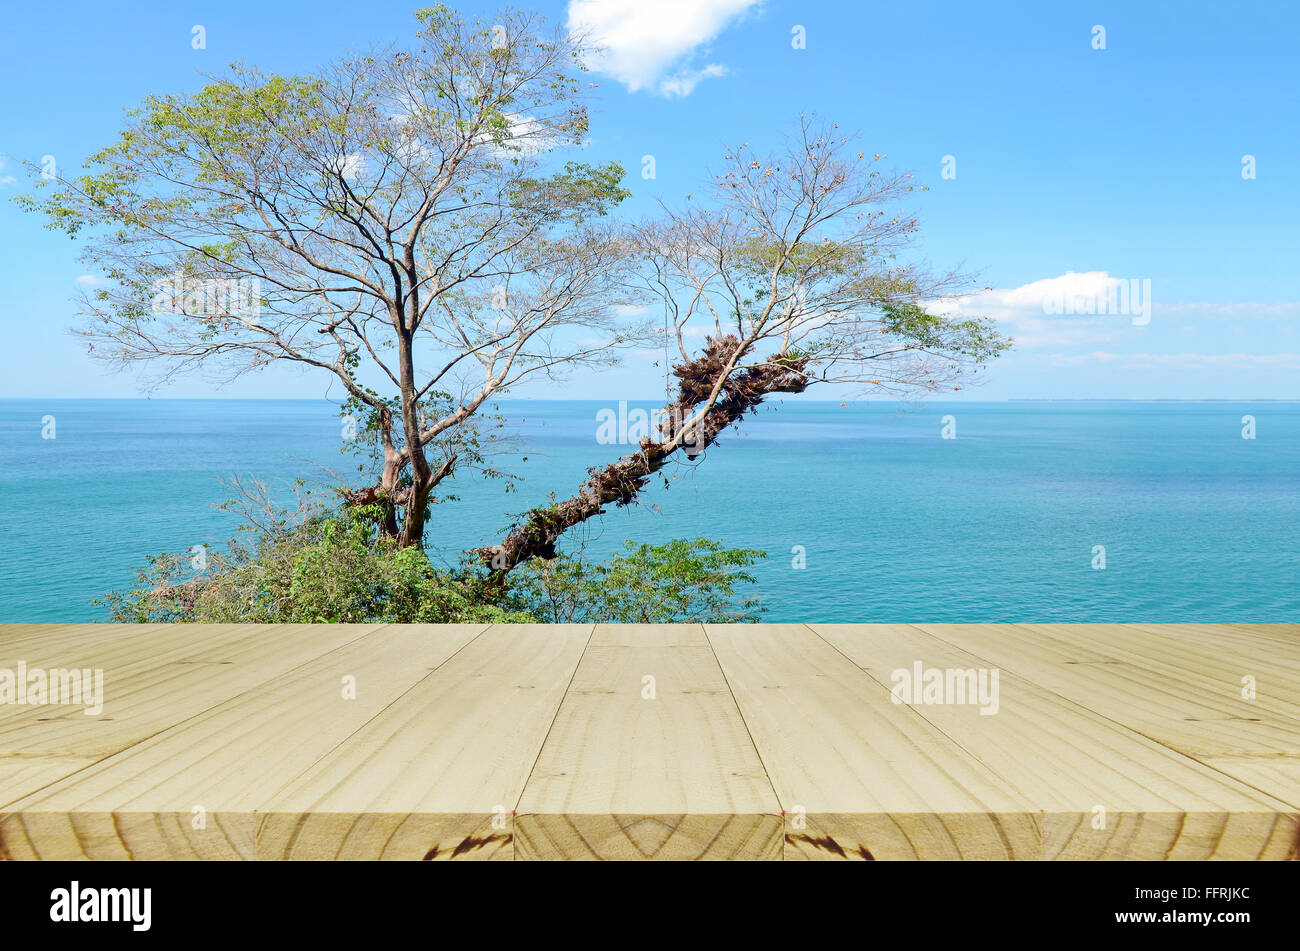 Bright Sky and South Sea View on the Sunny Day. Stock Photo